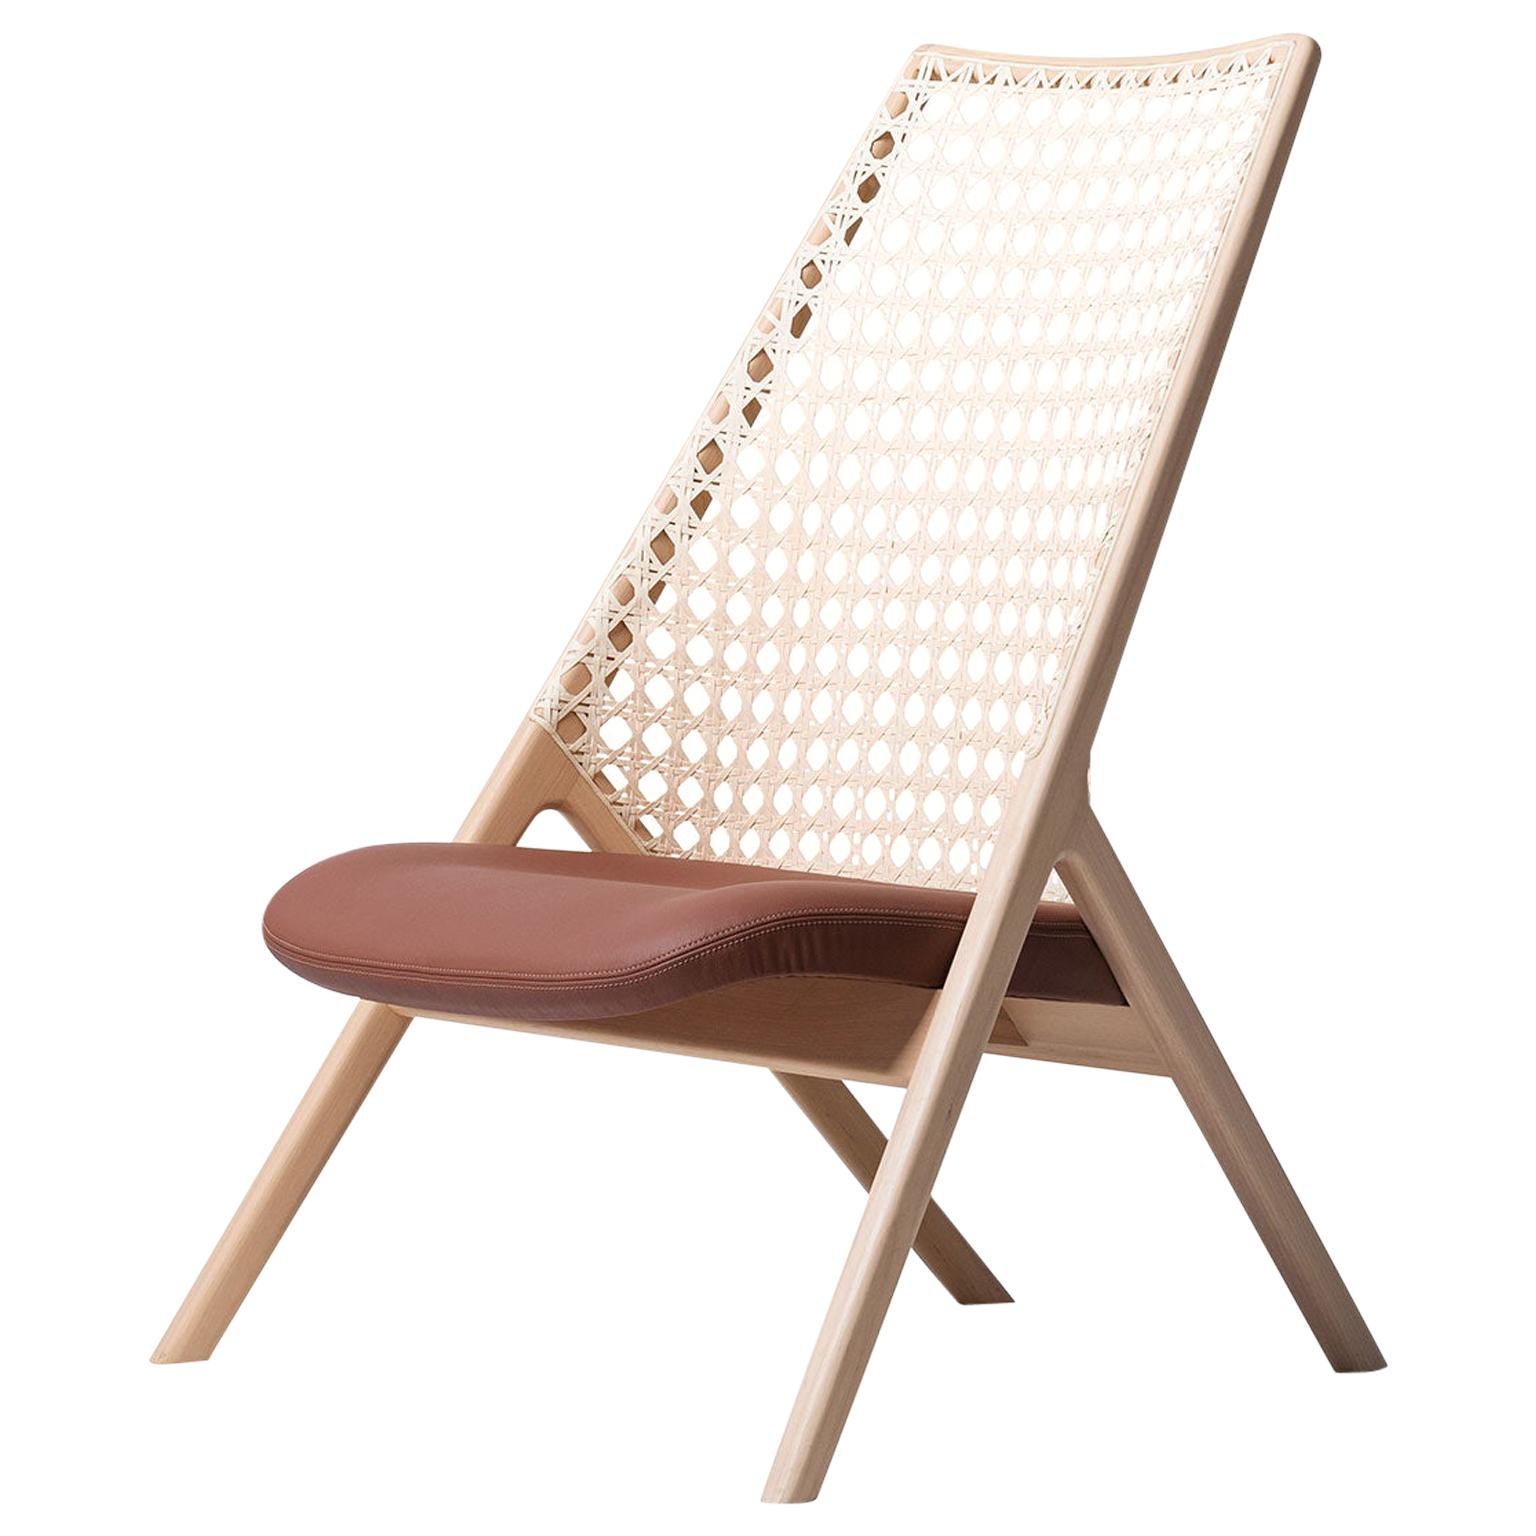 Tela Lounge Chair in Leather, by Wentz, Brazilian Contemporary Design